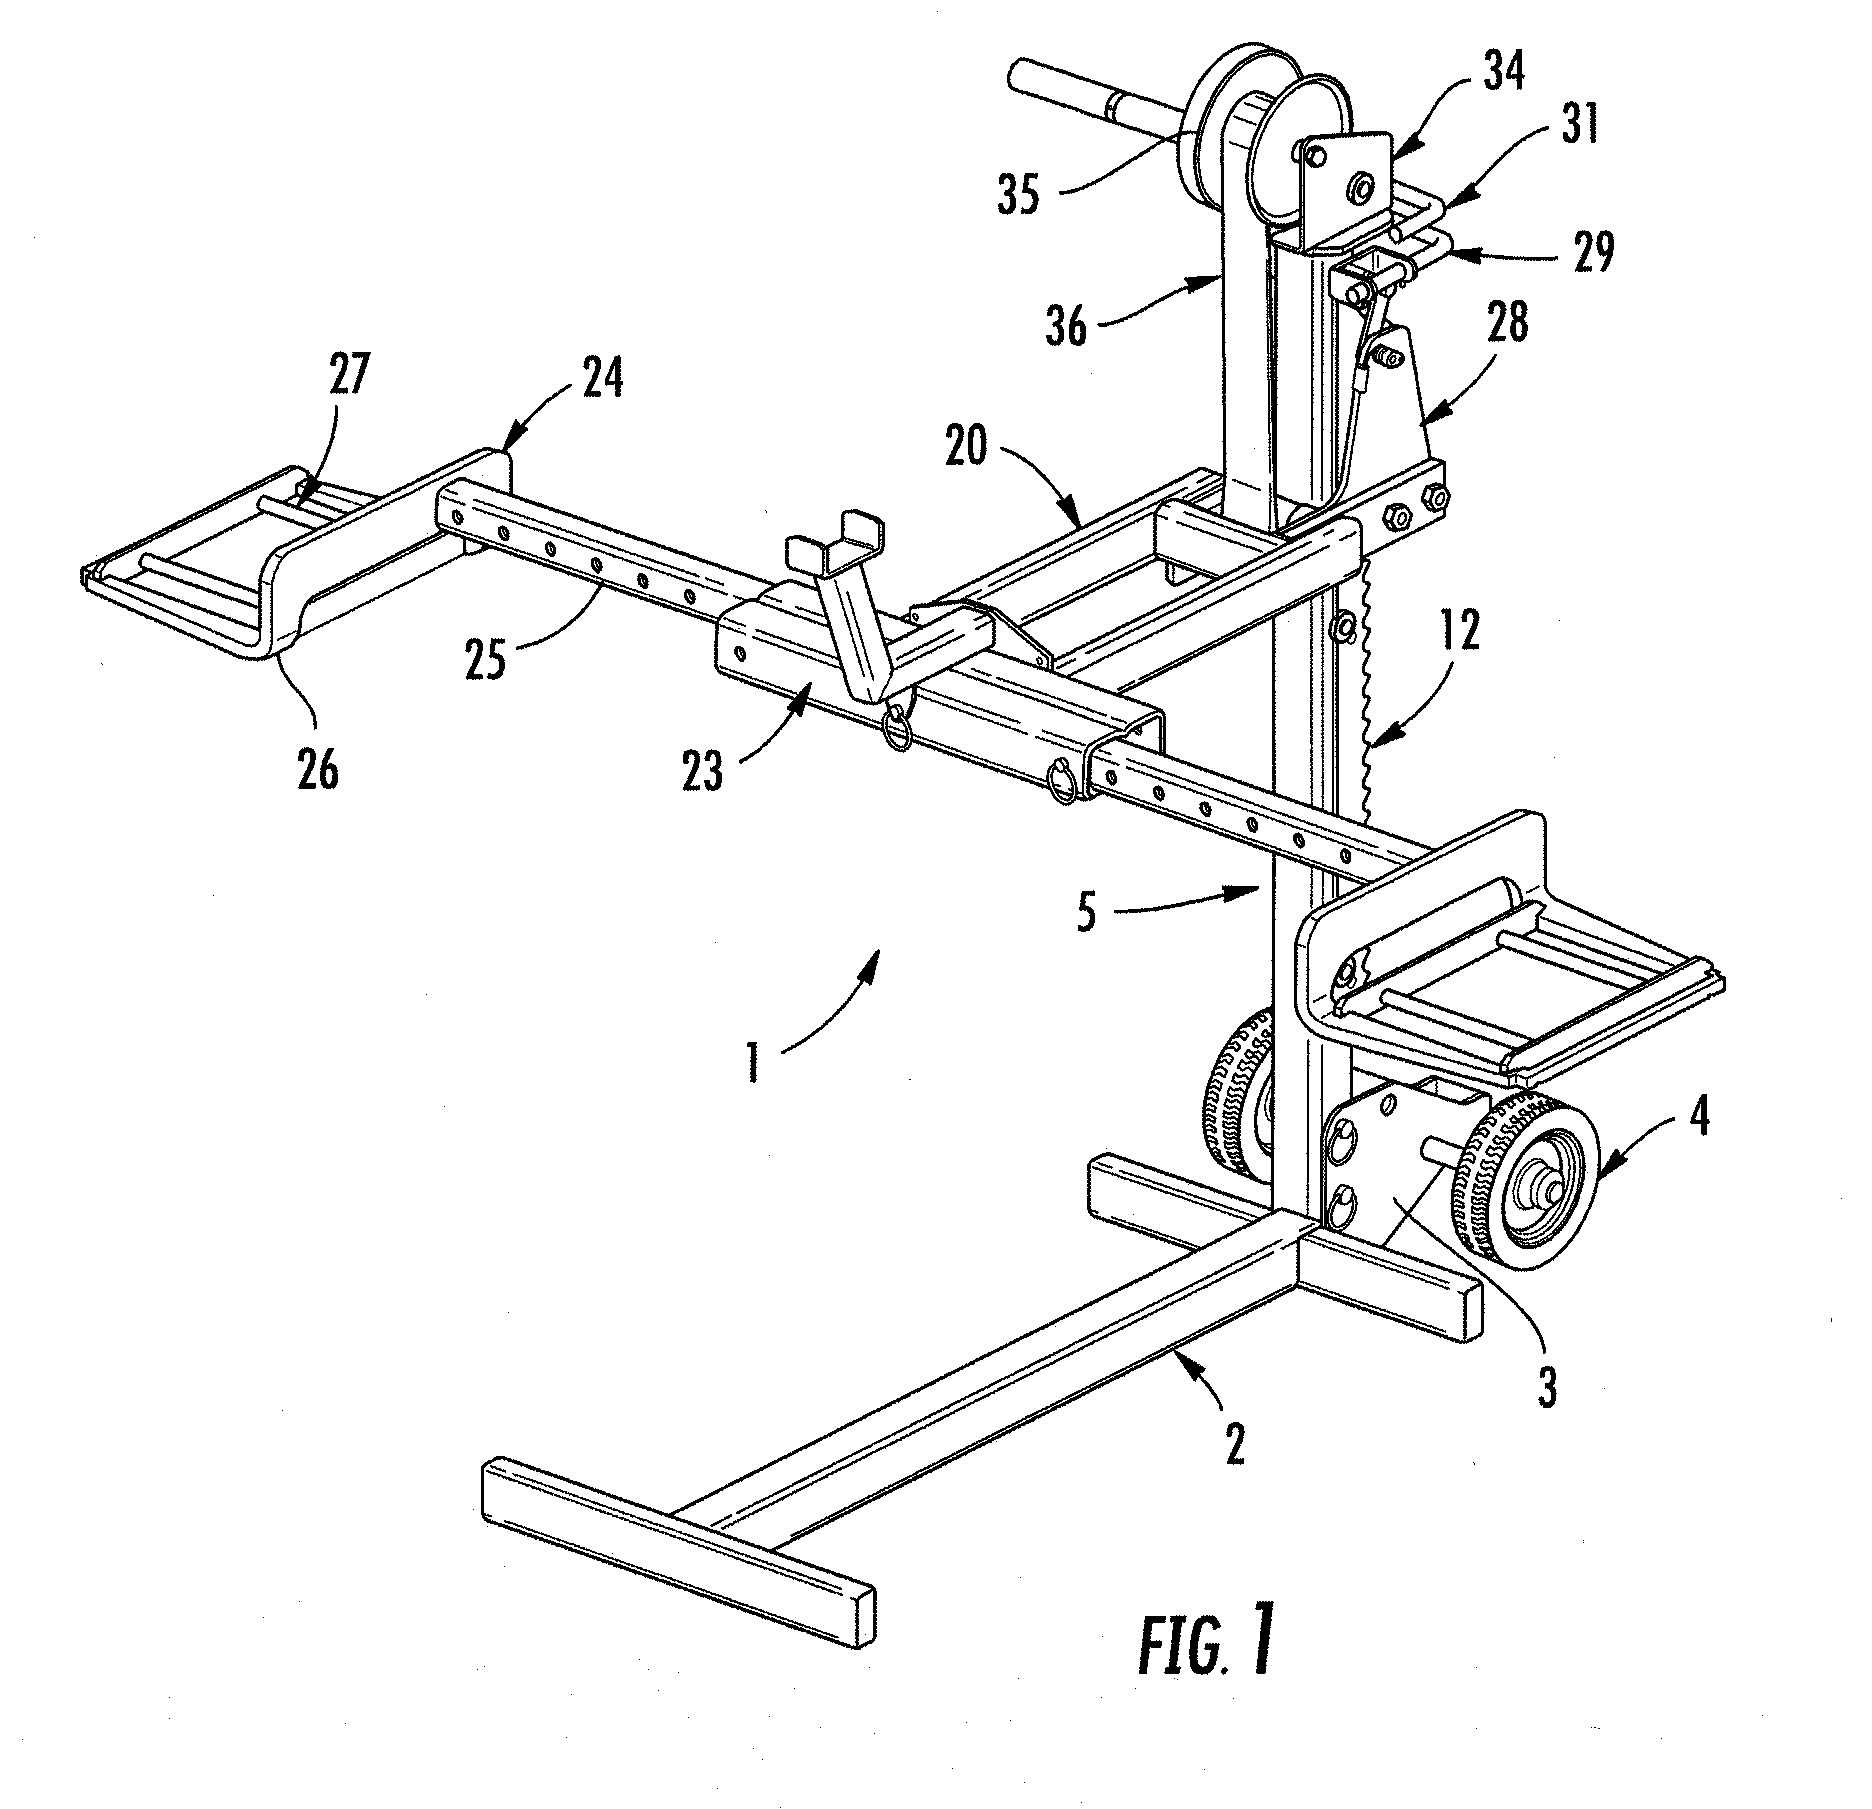 Apparatuses and methods for an improved vehicle jack